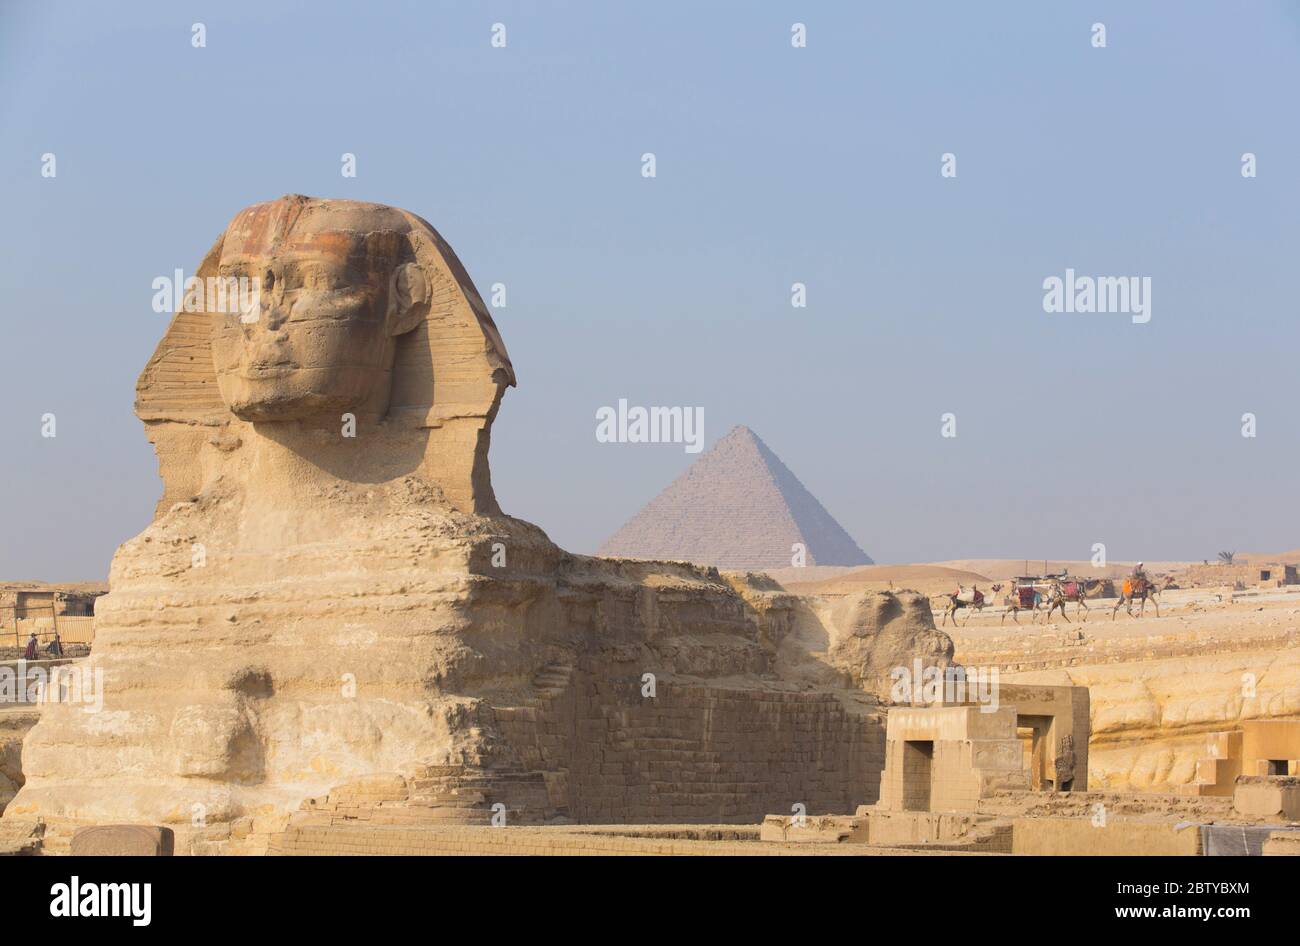 The Great Sphinx of Giza, Pyramid of Mycerinus in the background ...